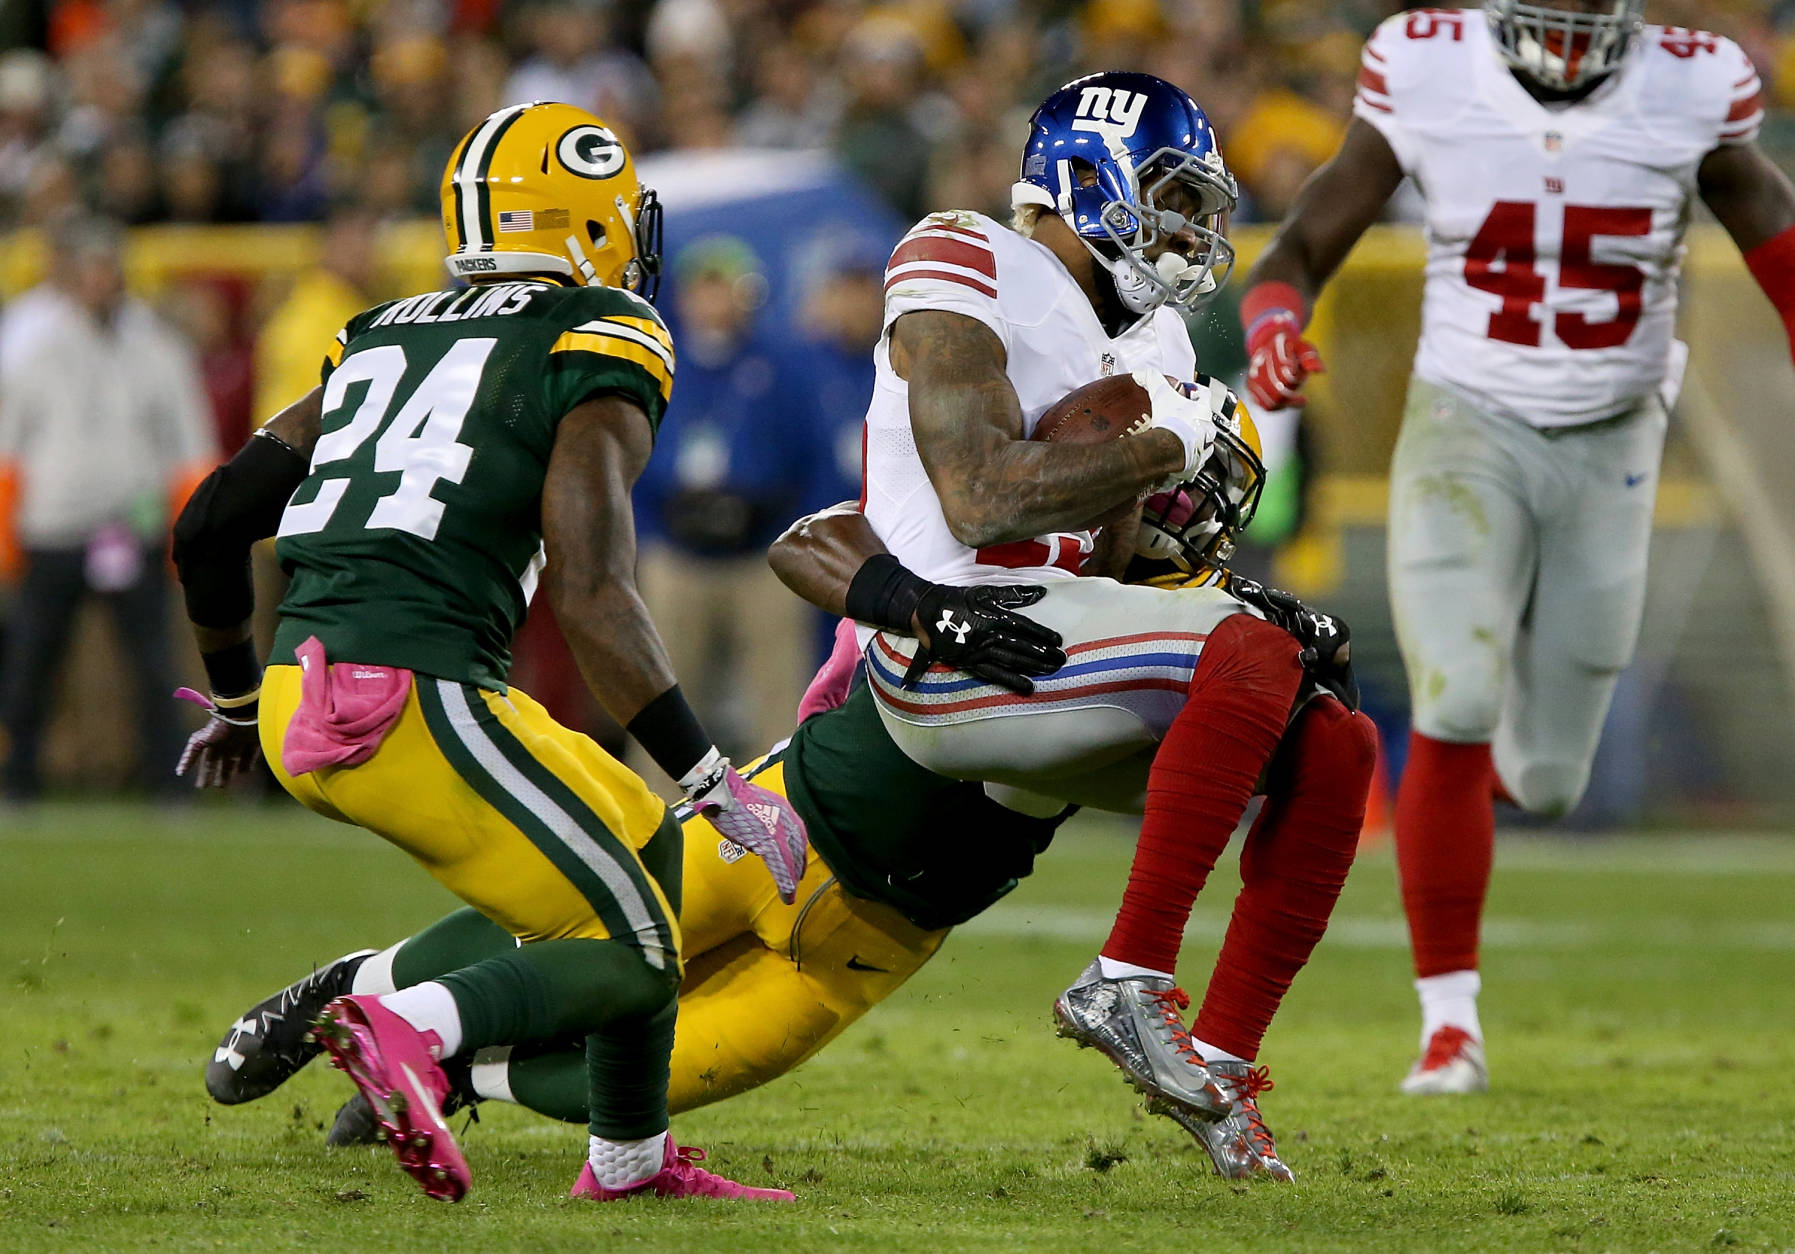 GREEN BAY, WI - OCTOBER 09:   Odell Beckham #13 of the New York Giants is tackled by Joe Thomas #48 of the Green Bay Packers in the second quarter at Lambeau Field on October 9, 2016 in Green Bay, Wisconsin. (Photo by Dylan Buell/Getty Images)